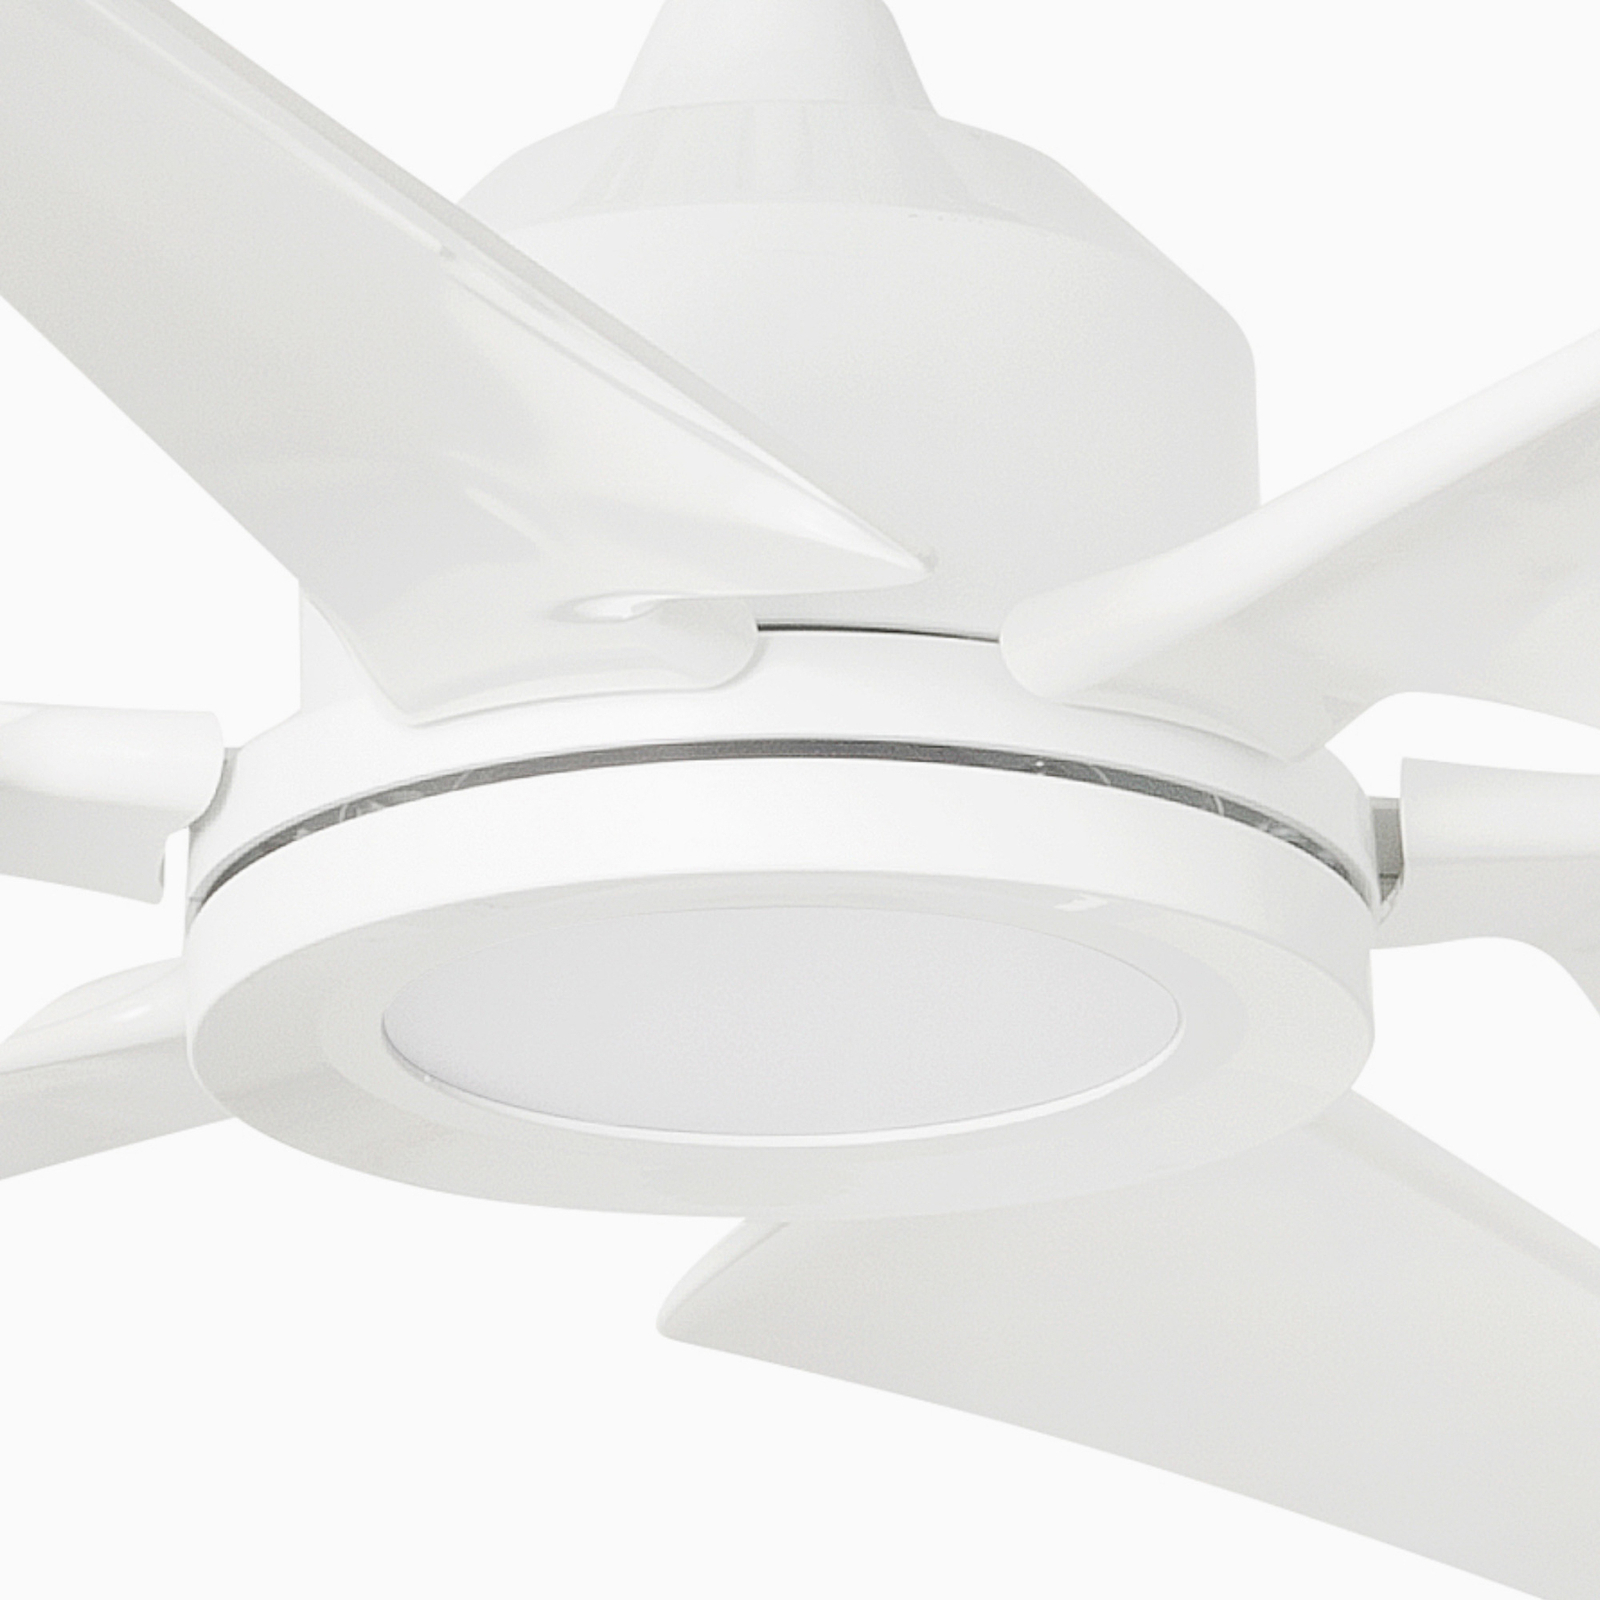 Cies XL ceiling fan for large rooms, DC white